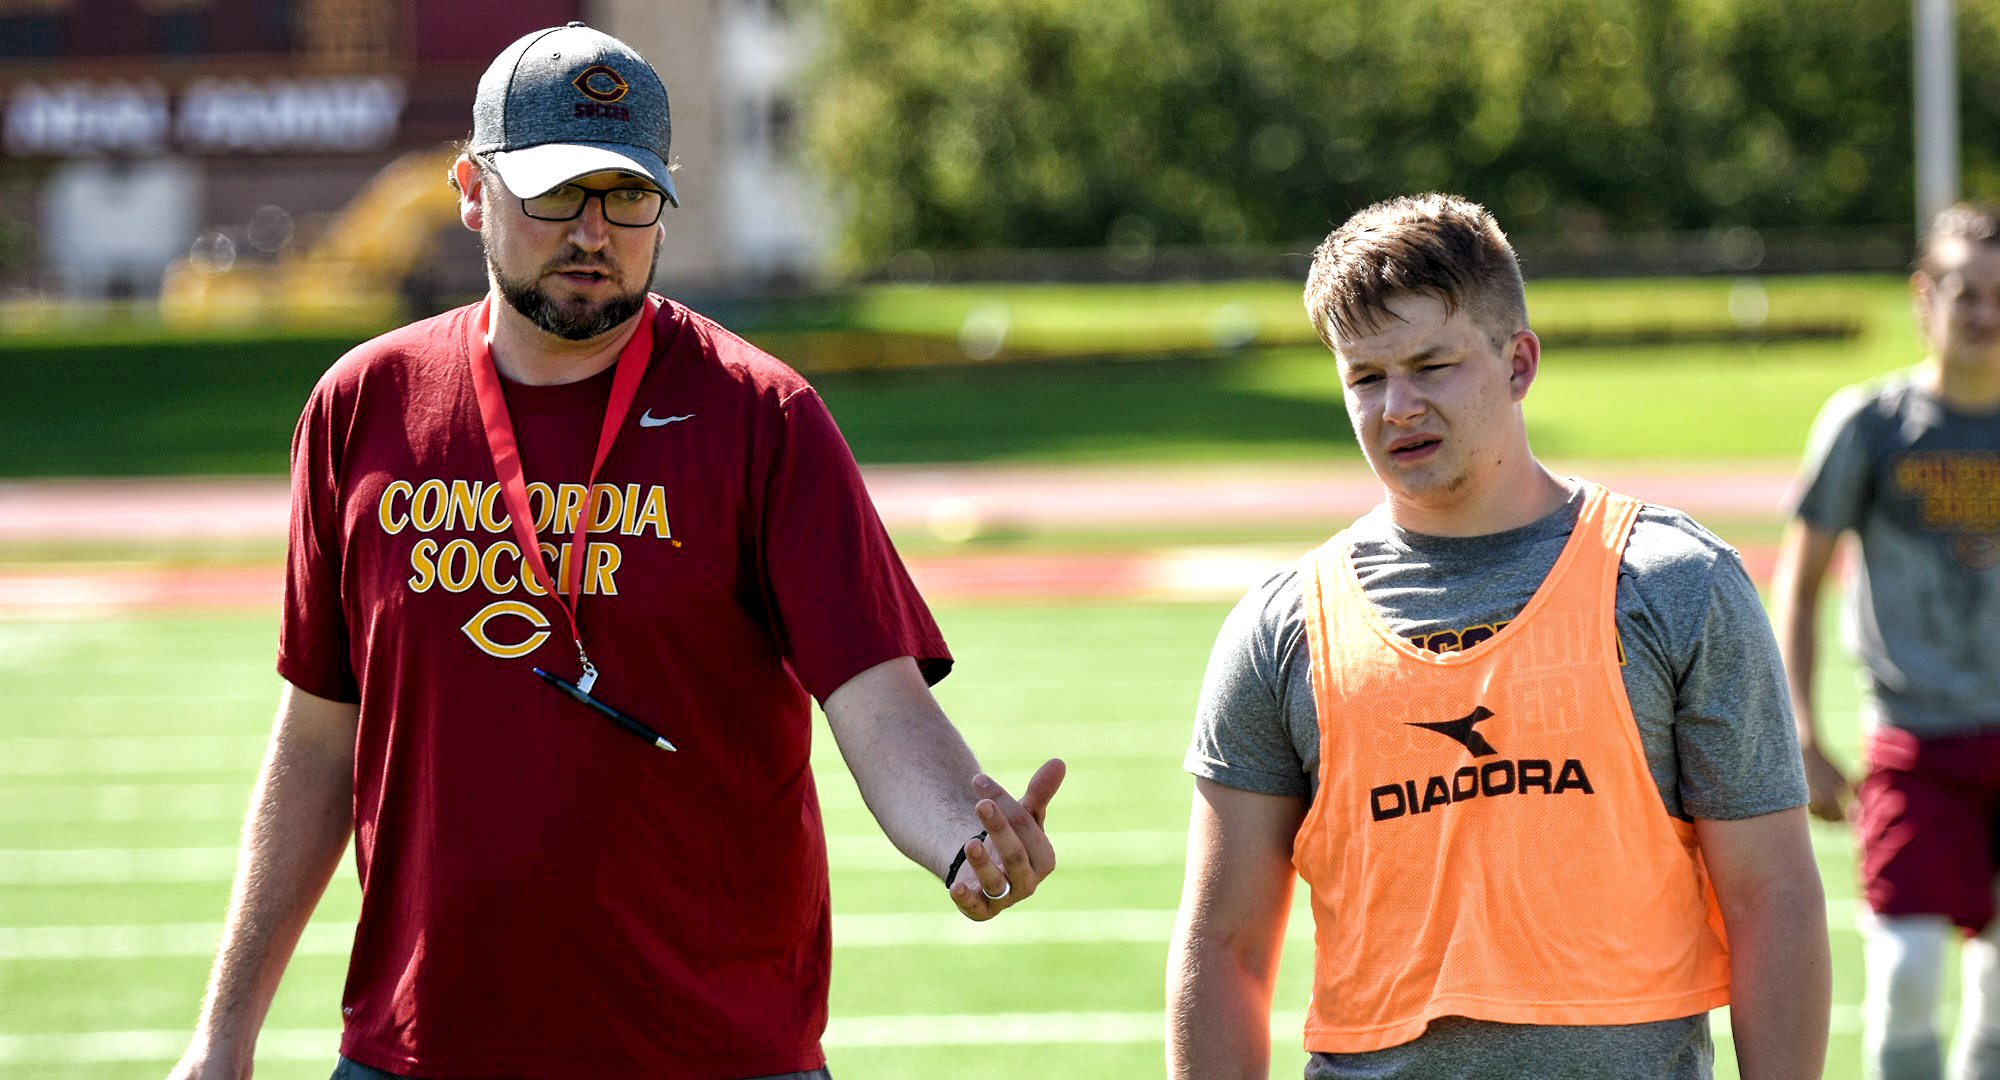 Ben Schneweis enters his eighth season as head coach of the Cobbers.